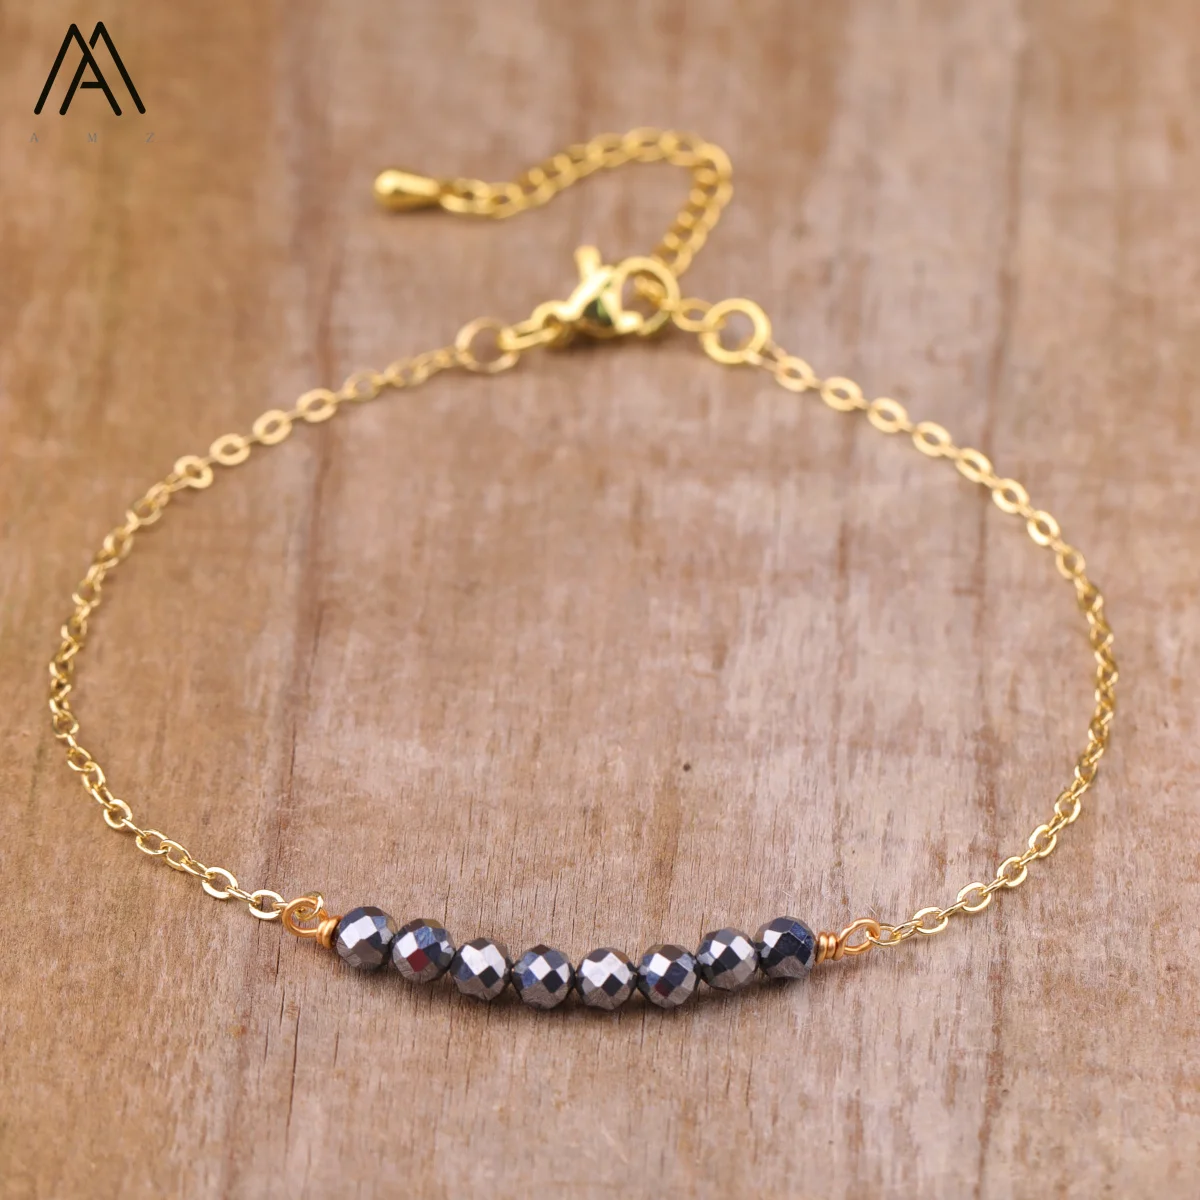 

Fashion Faceted Stone Bead Bracelet for Women healing Crystal Amethyst Lapis Hand Chain Gold Bracelets Wholesale